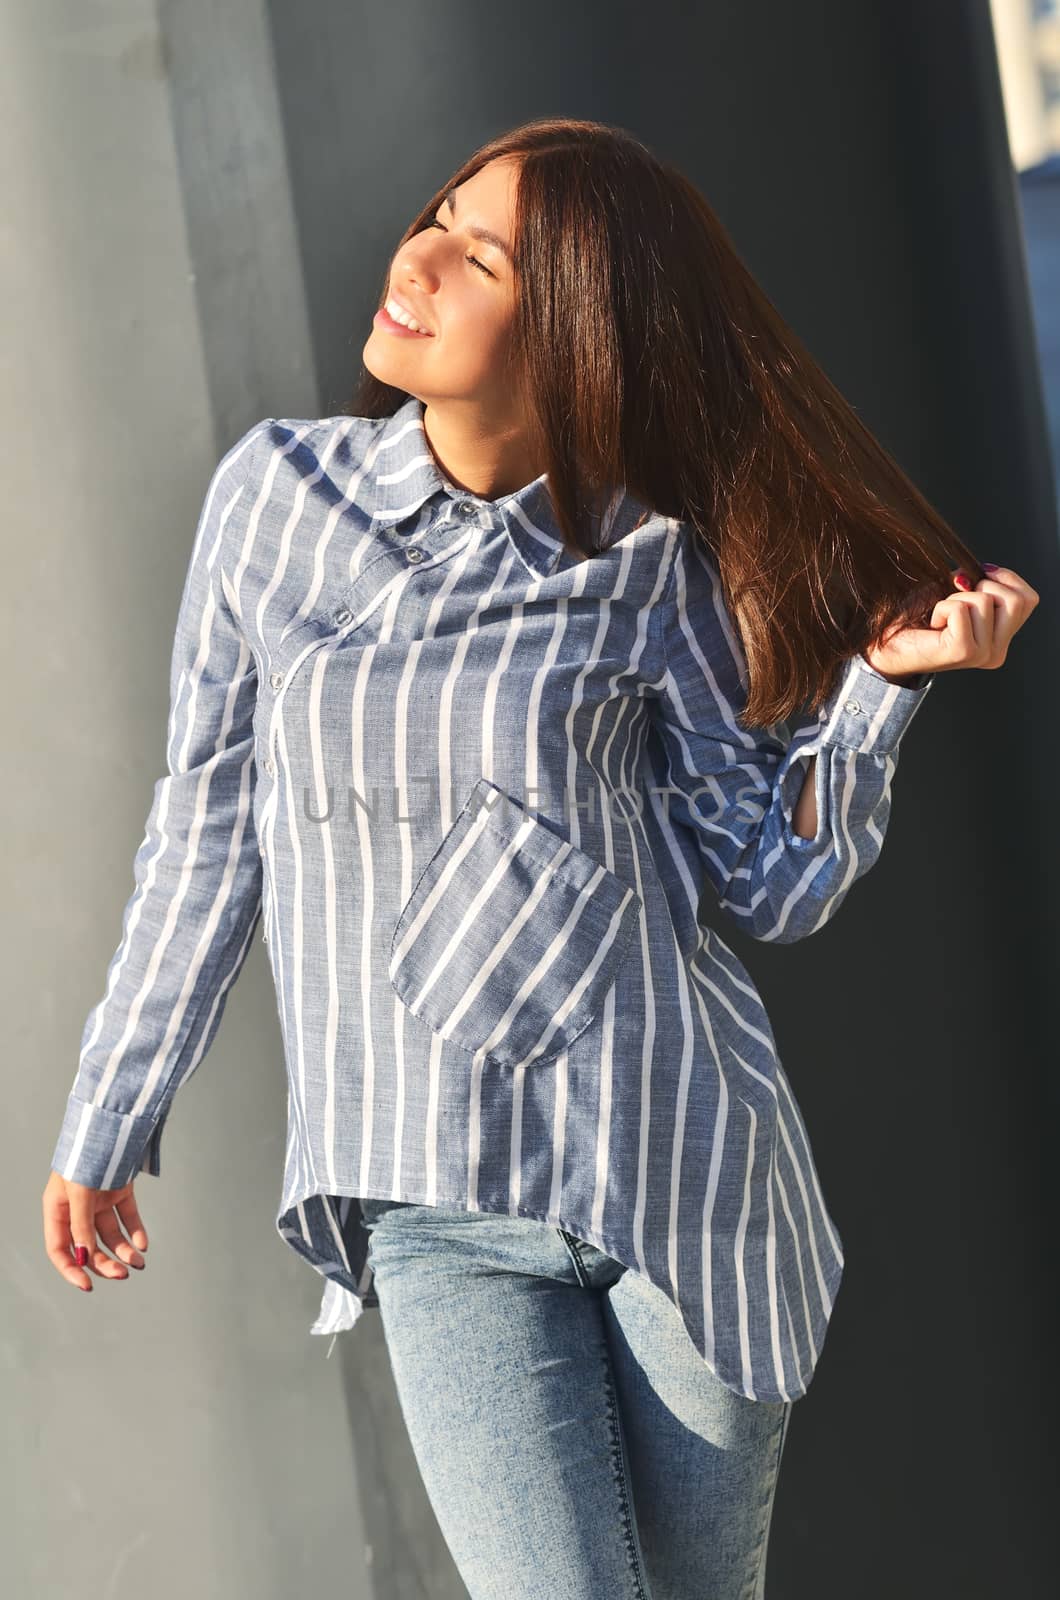 Portrait's young cool asian girl stands near the wall and posing and she dressed a striped shirt by xzgorik